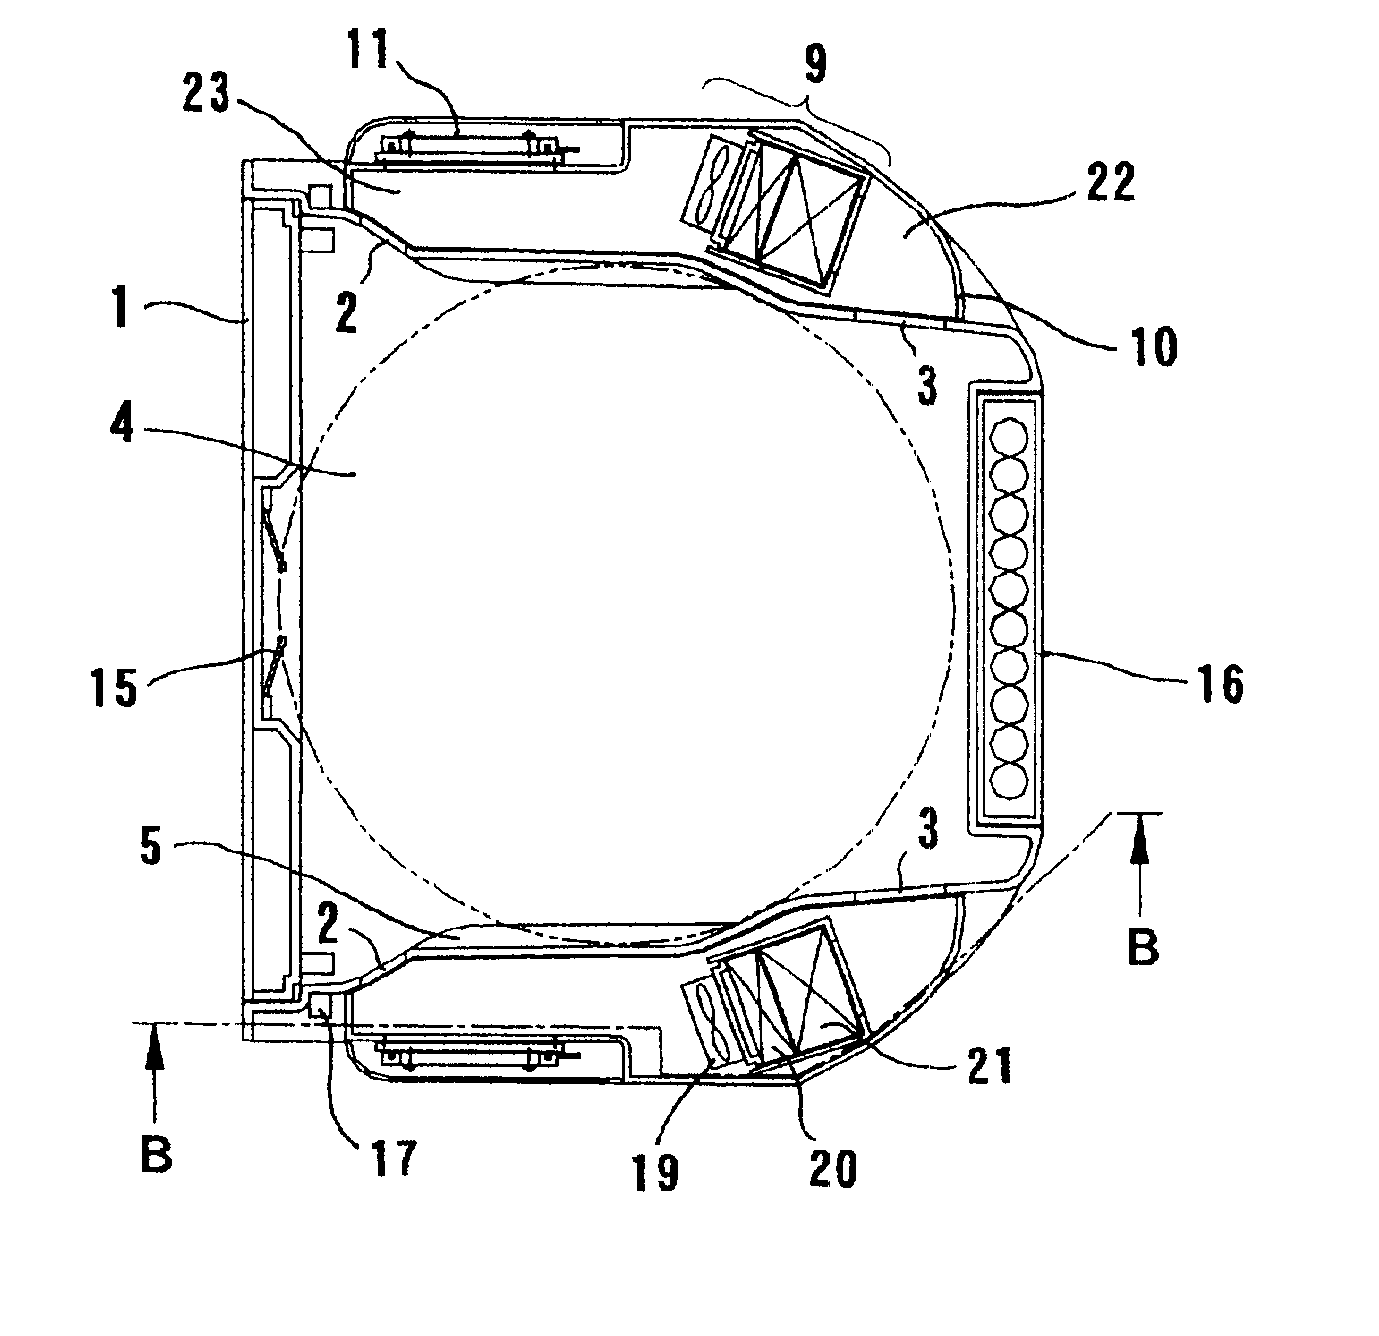 Substrate transport container